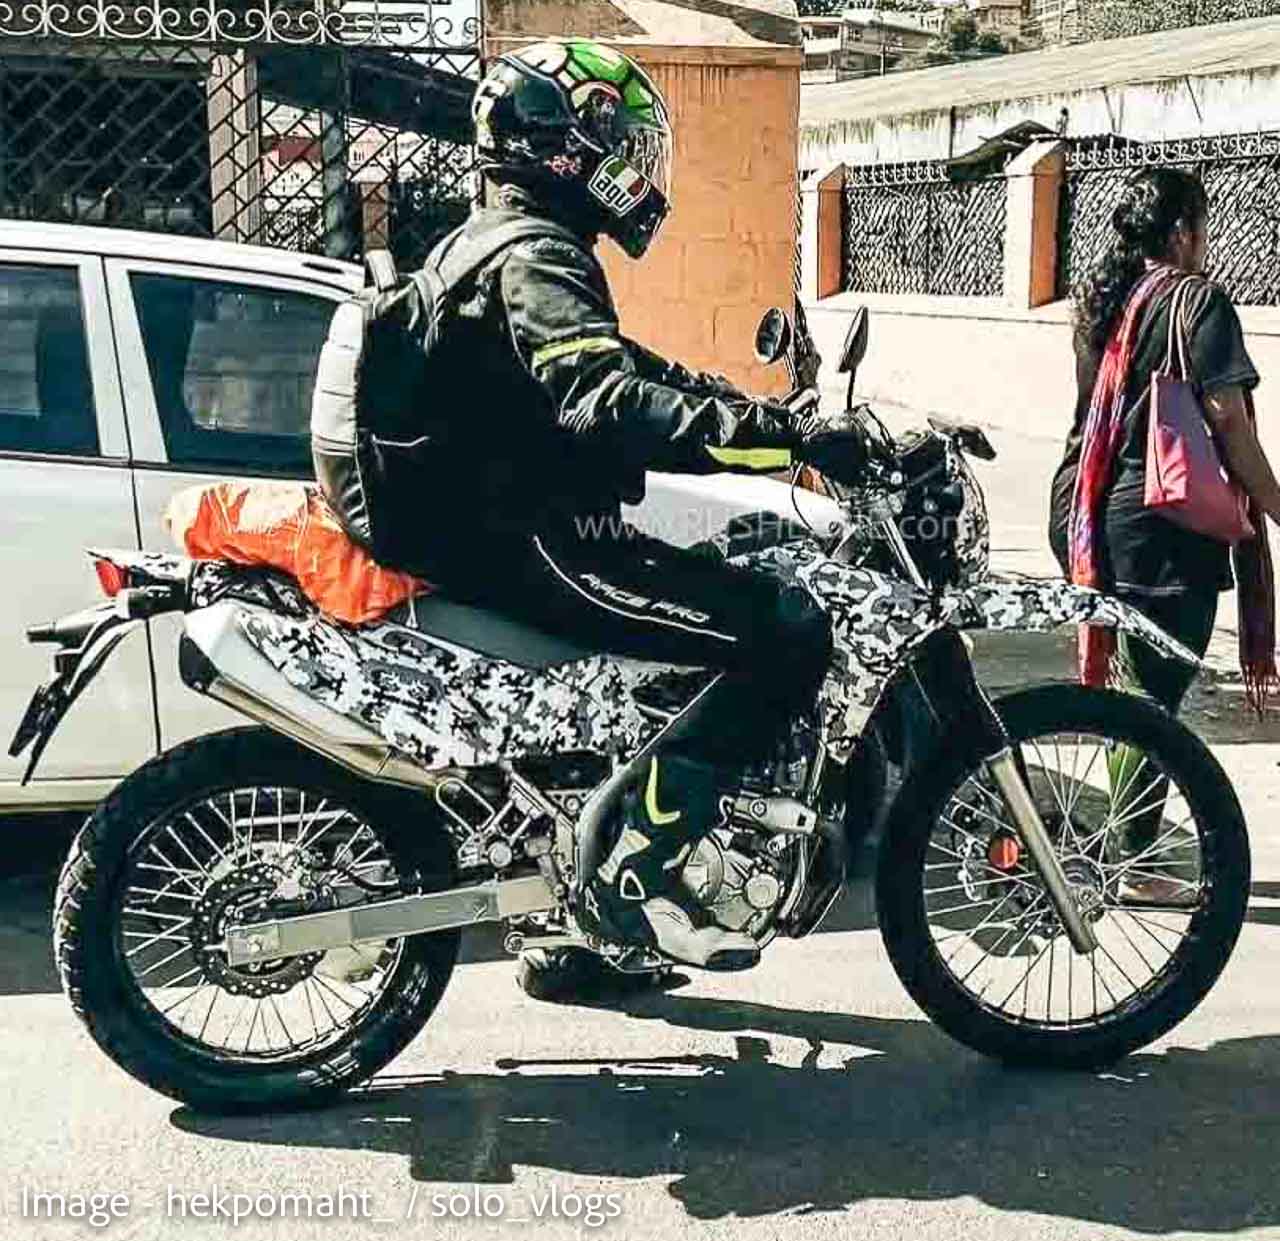 Yamaha ADV Motorcycle Spied - Side